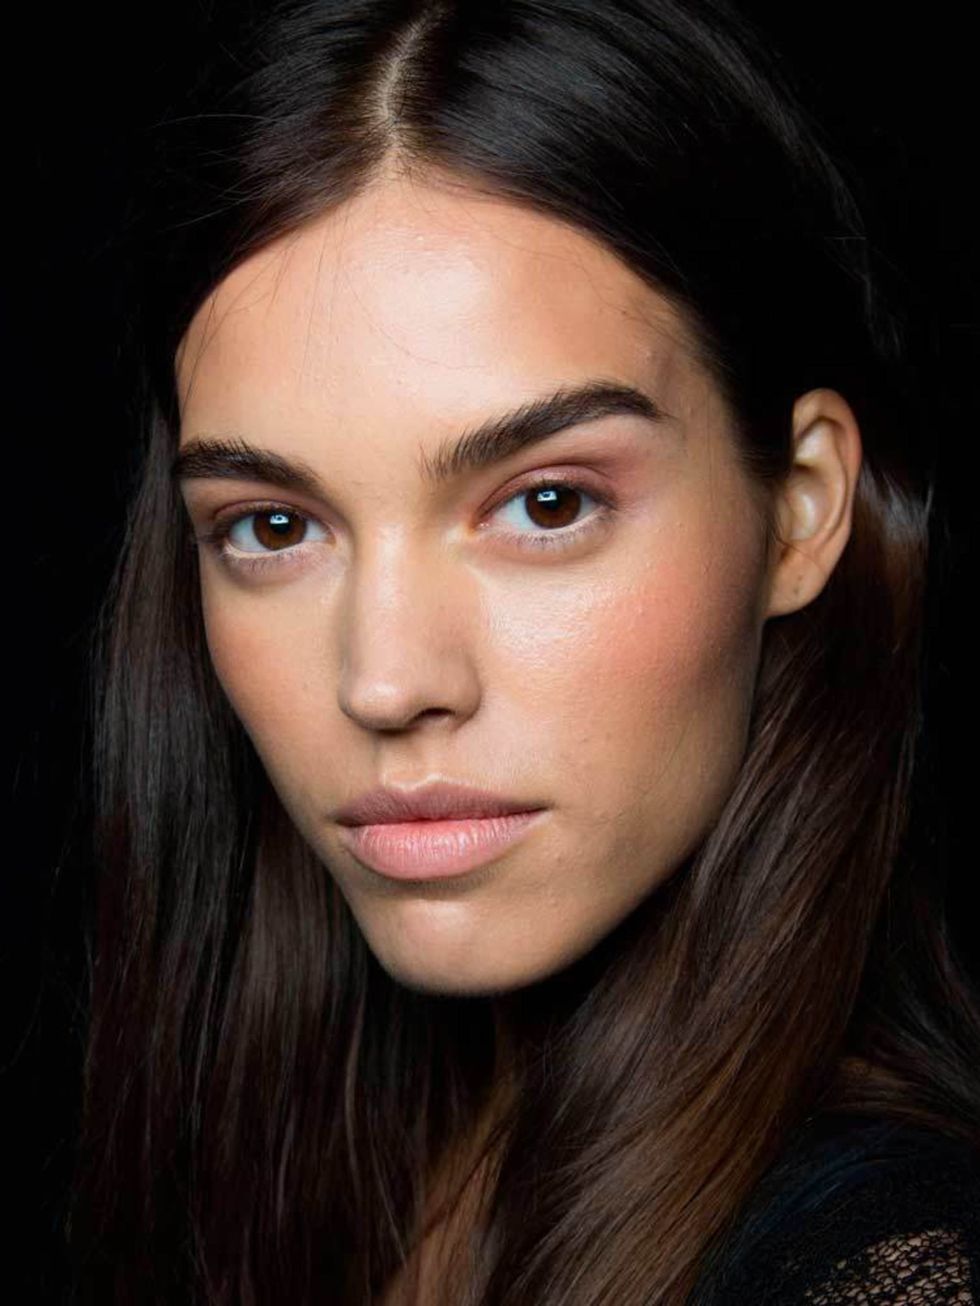 <p><a href="http://www.elleuk.com/catwalk/bcbgmaxazria/spring-summer-2015">BCBG Max Azria</a></p>

<p>The Look: Bronzed Beauty</p>

<p>Make-up Artist: Val Garland for MAC</p>

<p>Key Product: Bronzer</p>

<p>Top tip: to get that 'fresh from vacation look'